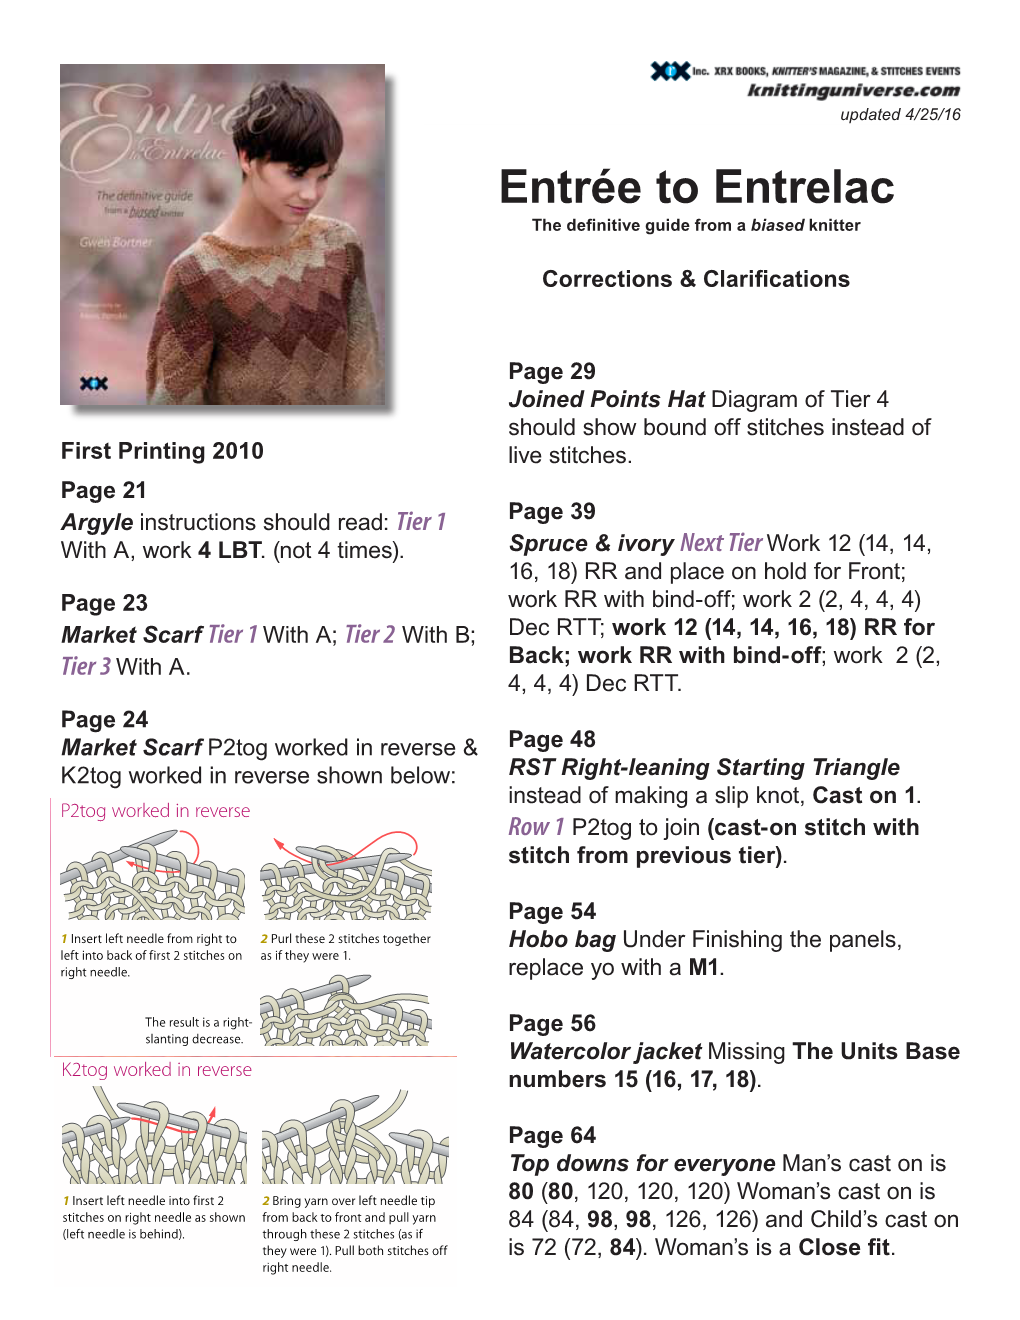 Entrée to Entrelac the Definitive Guide from Abiased Knitter Purl in Reverse (From Left to Right) Corrections & Clarifications